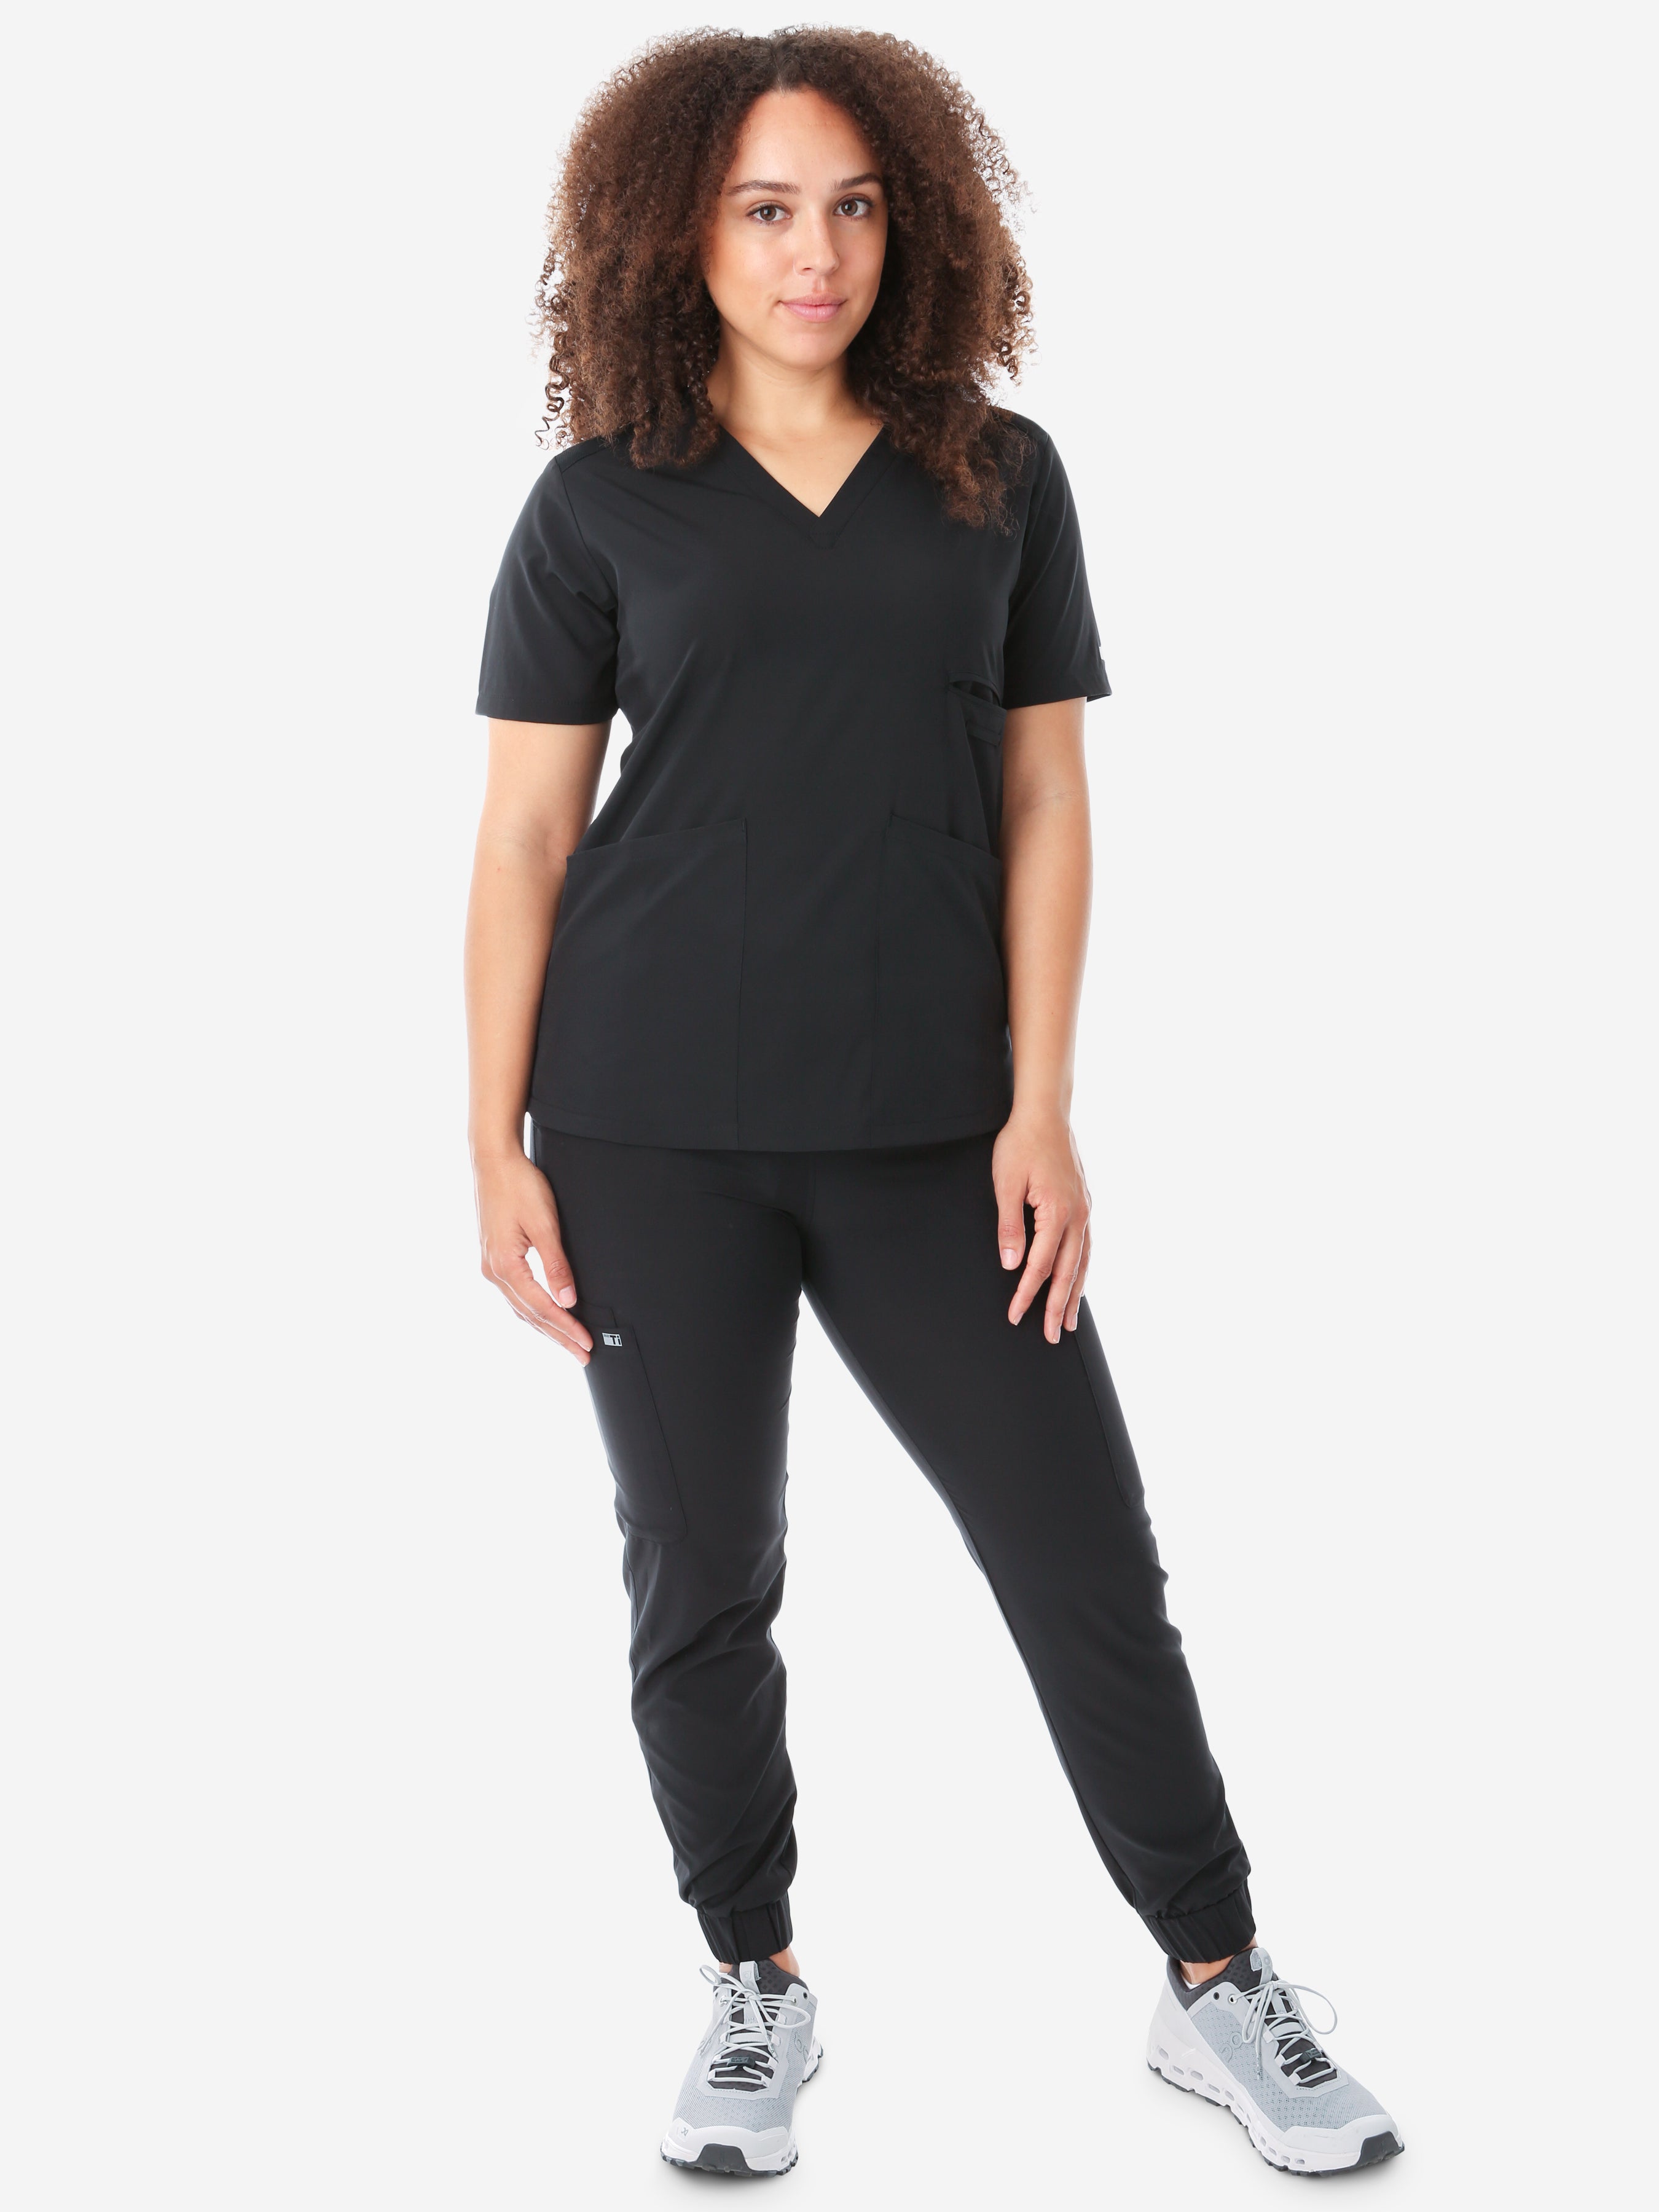 Women&#39;s Four-Pocket Scrub Top Real Black Top Full Body Front View with Joggers